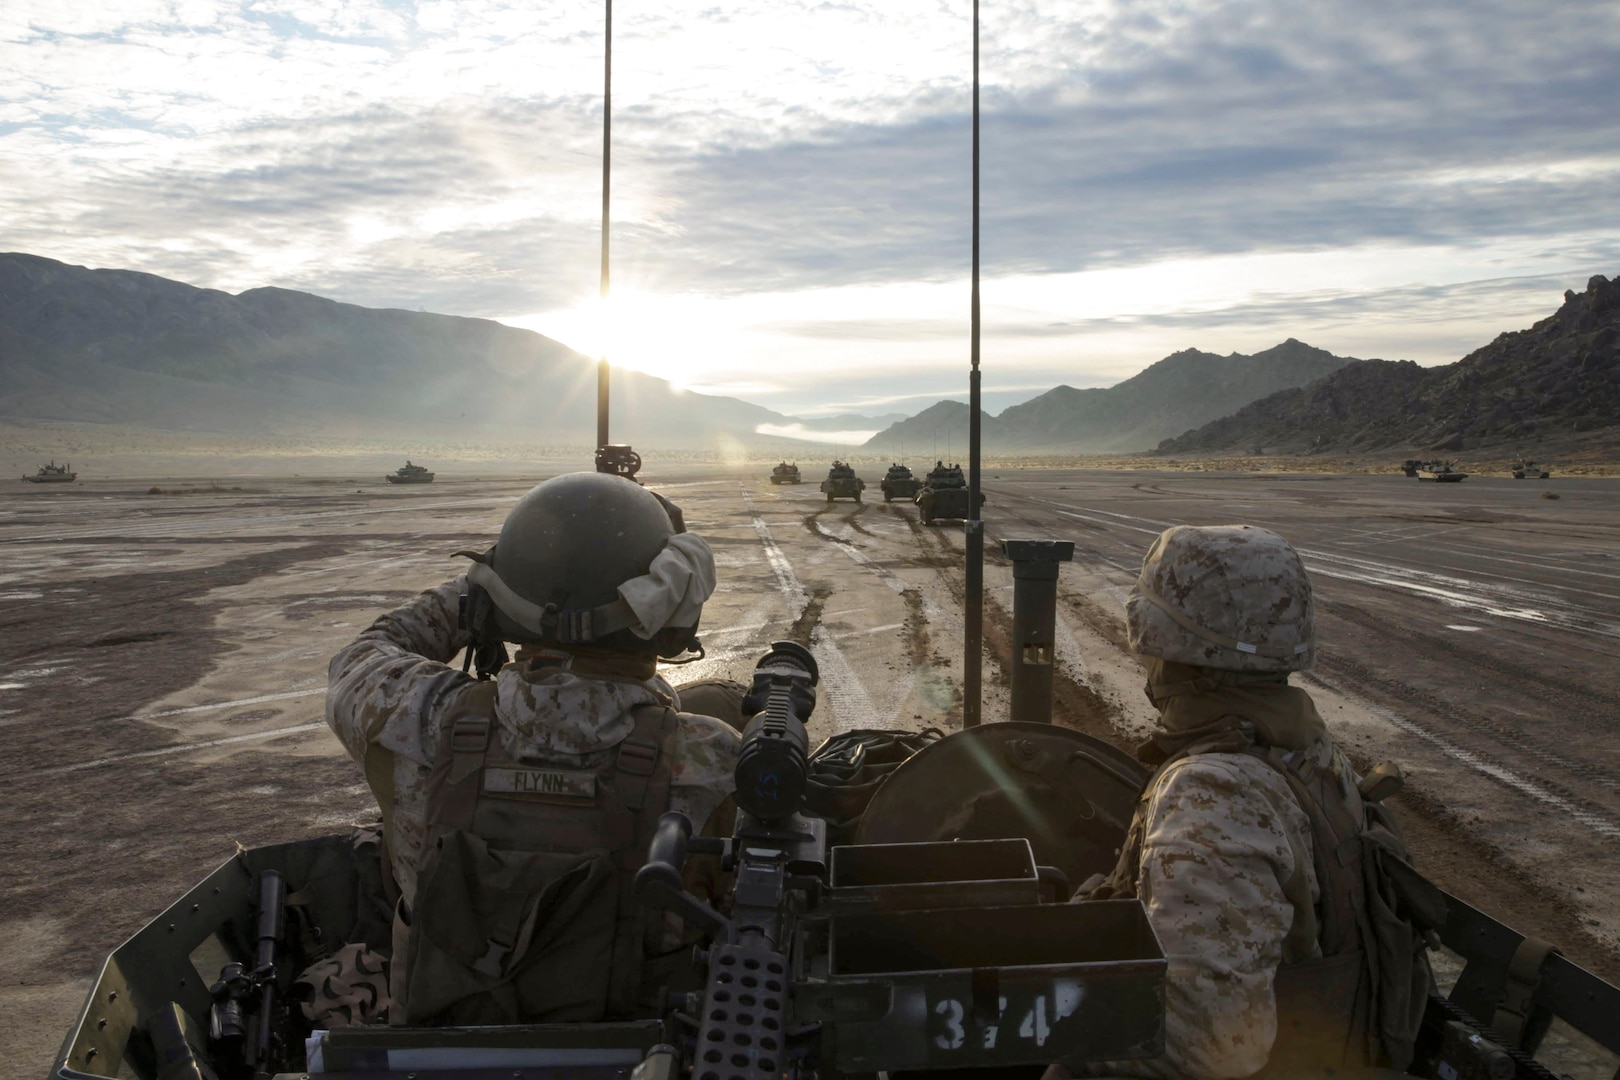 Two Marines ride in a tank in the desert as other tanks travel in the background.